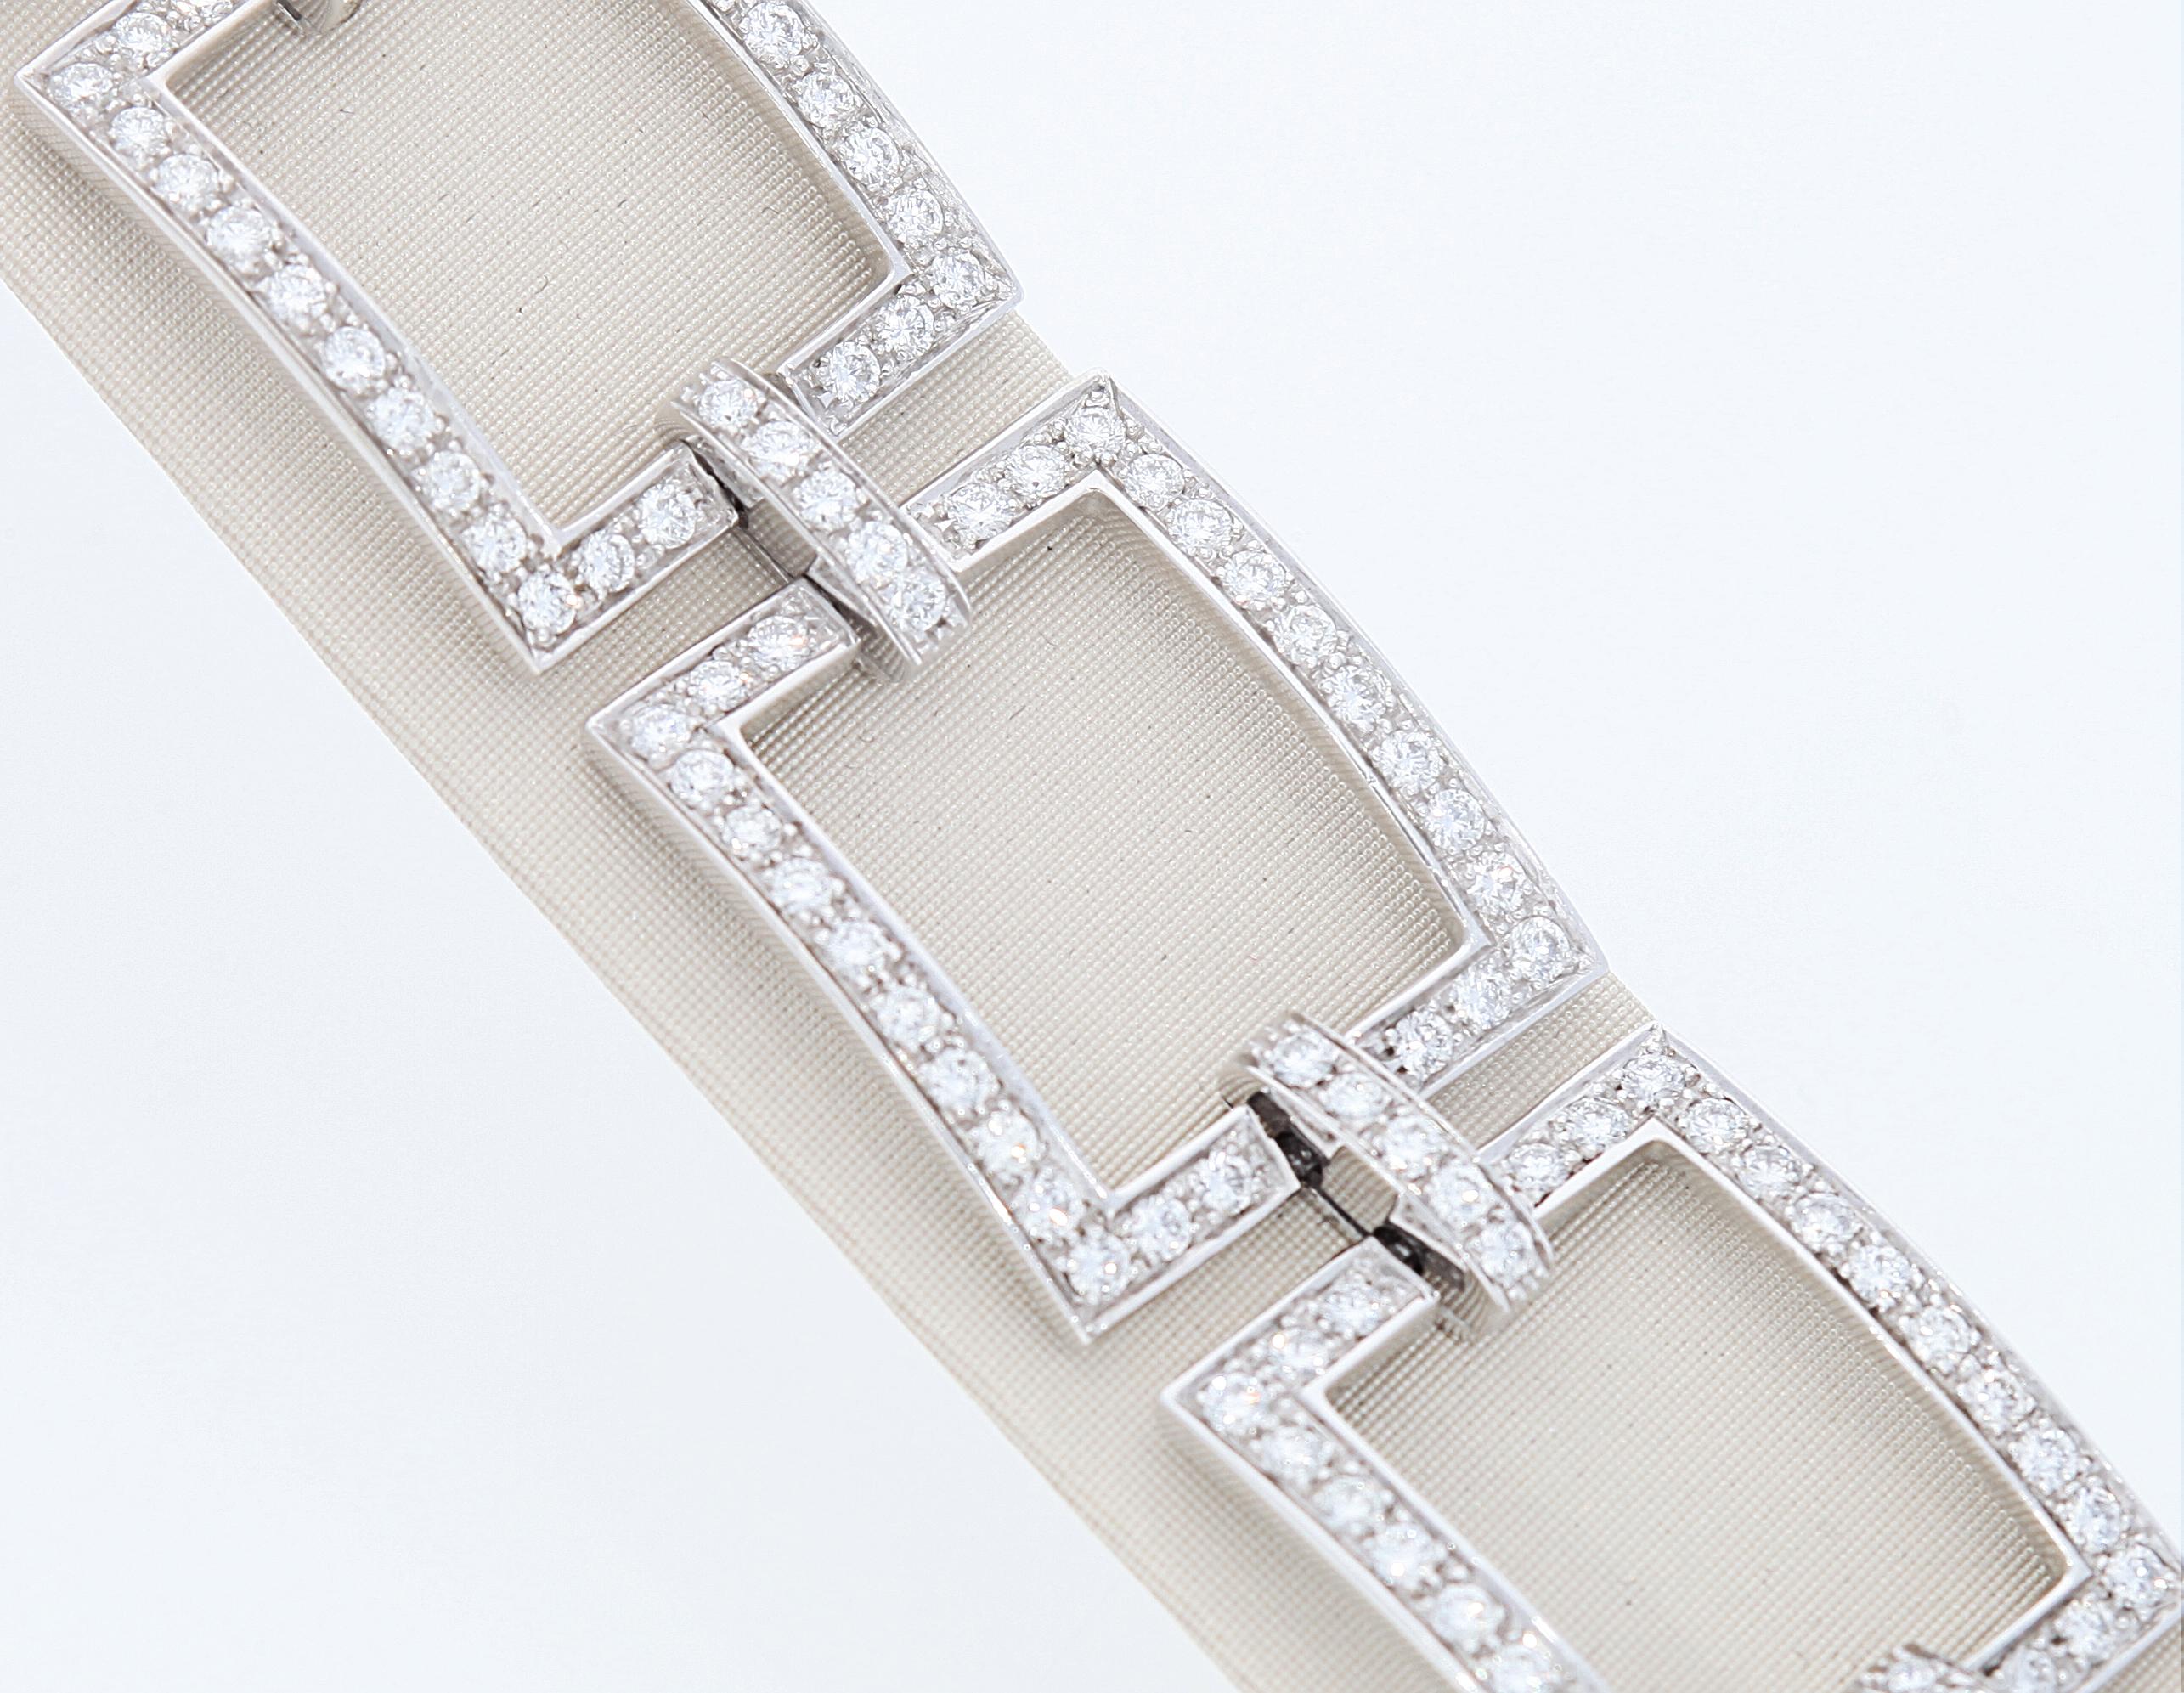 Contemporary Diamonds ct 4.95 on Rectangular Link Bracelet in 18 Kt Gold. Made in Italy.